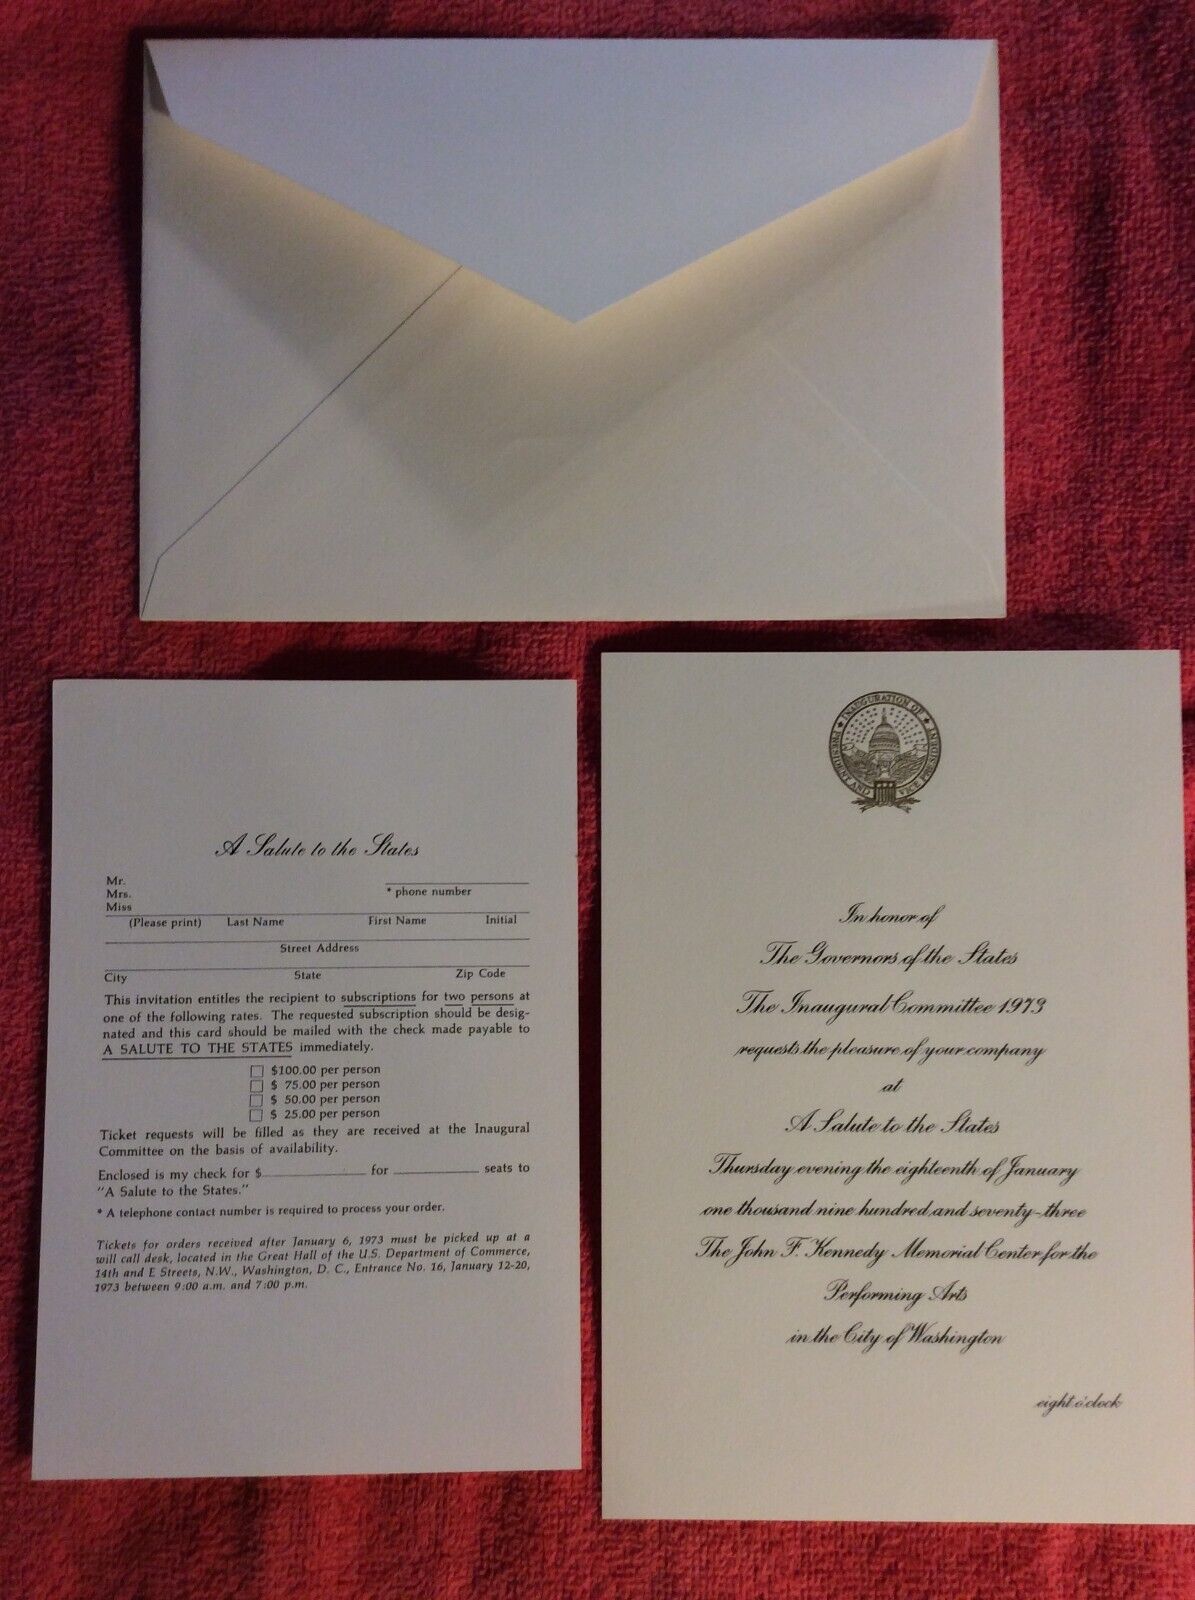 1973 INAUGURAL COMMITTEE INVITATION A SALUTE TO THE STATES JFK MEMORIAL RARE